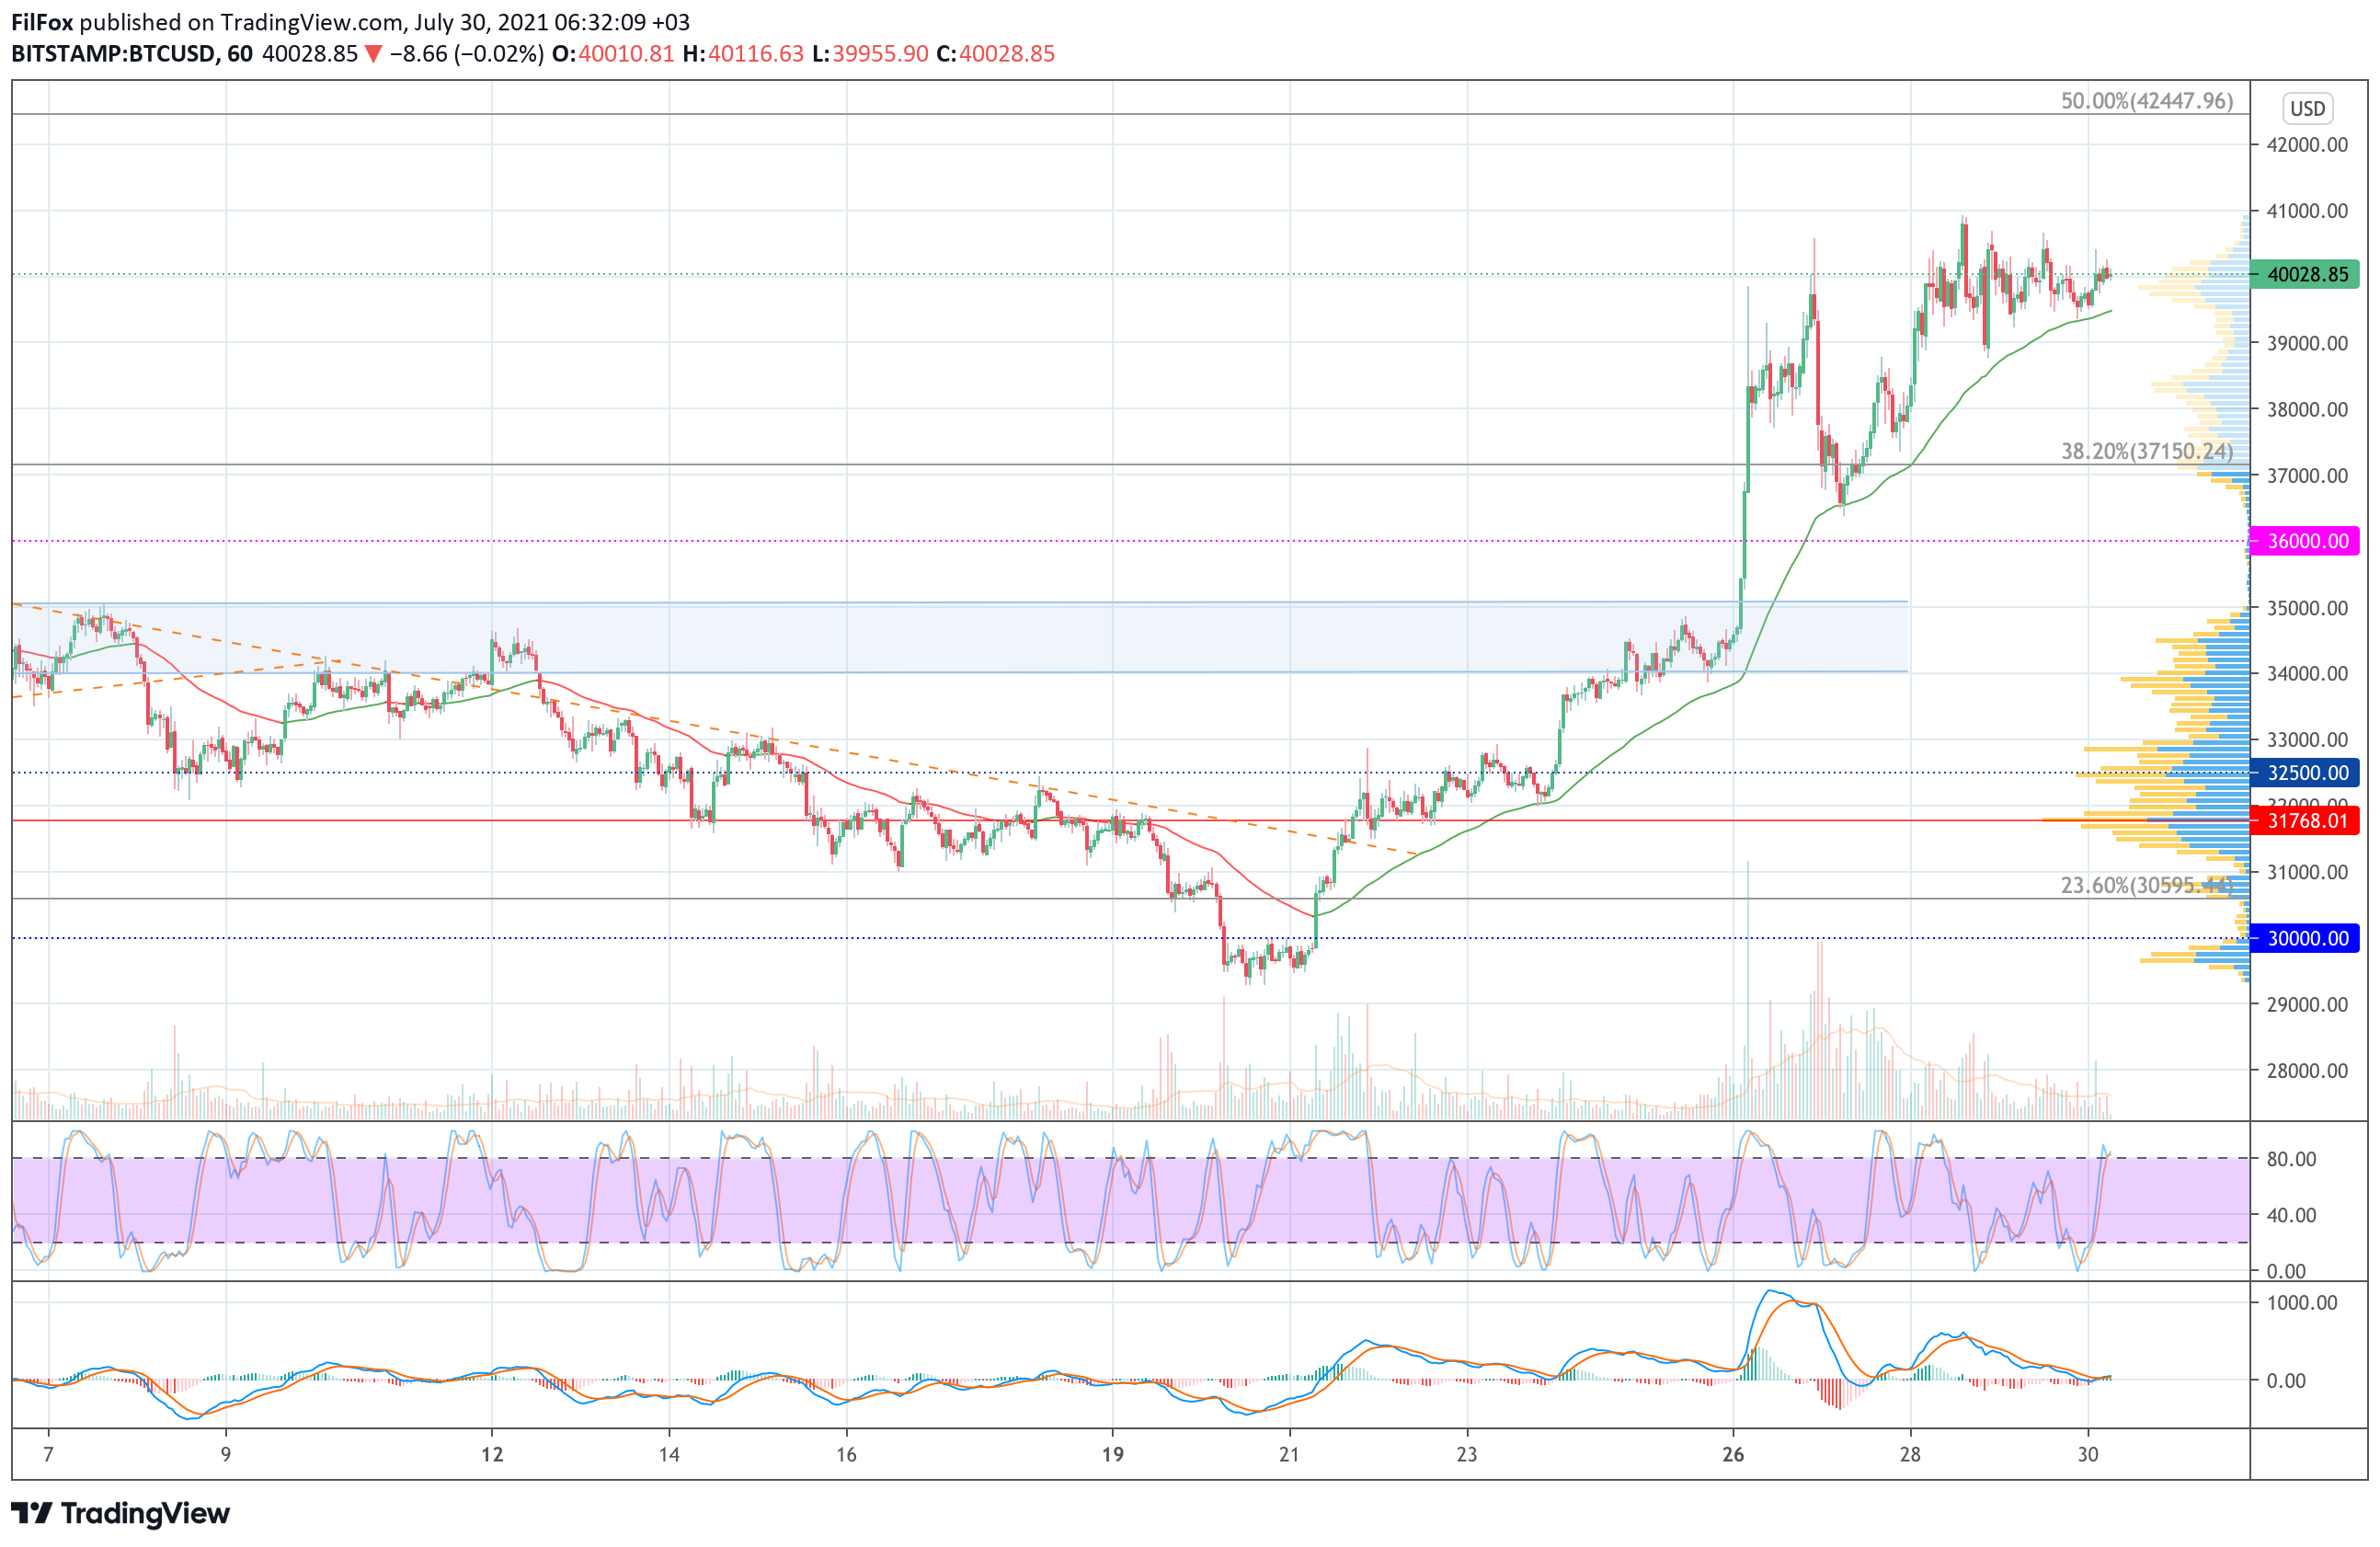 Analysis of the prices of Bitcoin, Ethereum, XRP for 07/30/2021